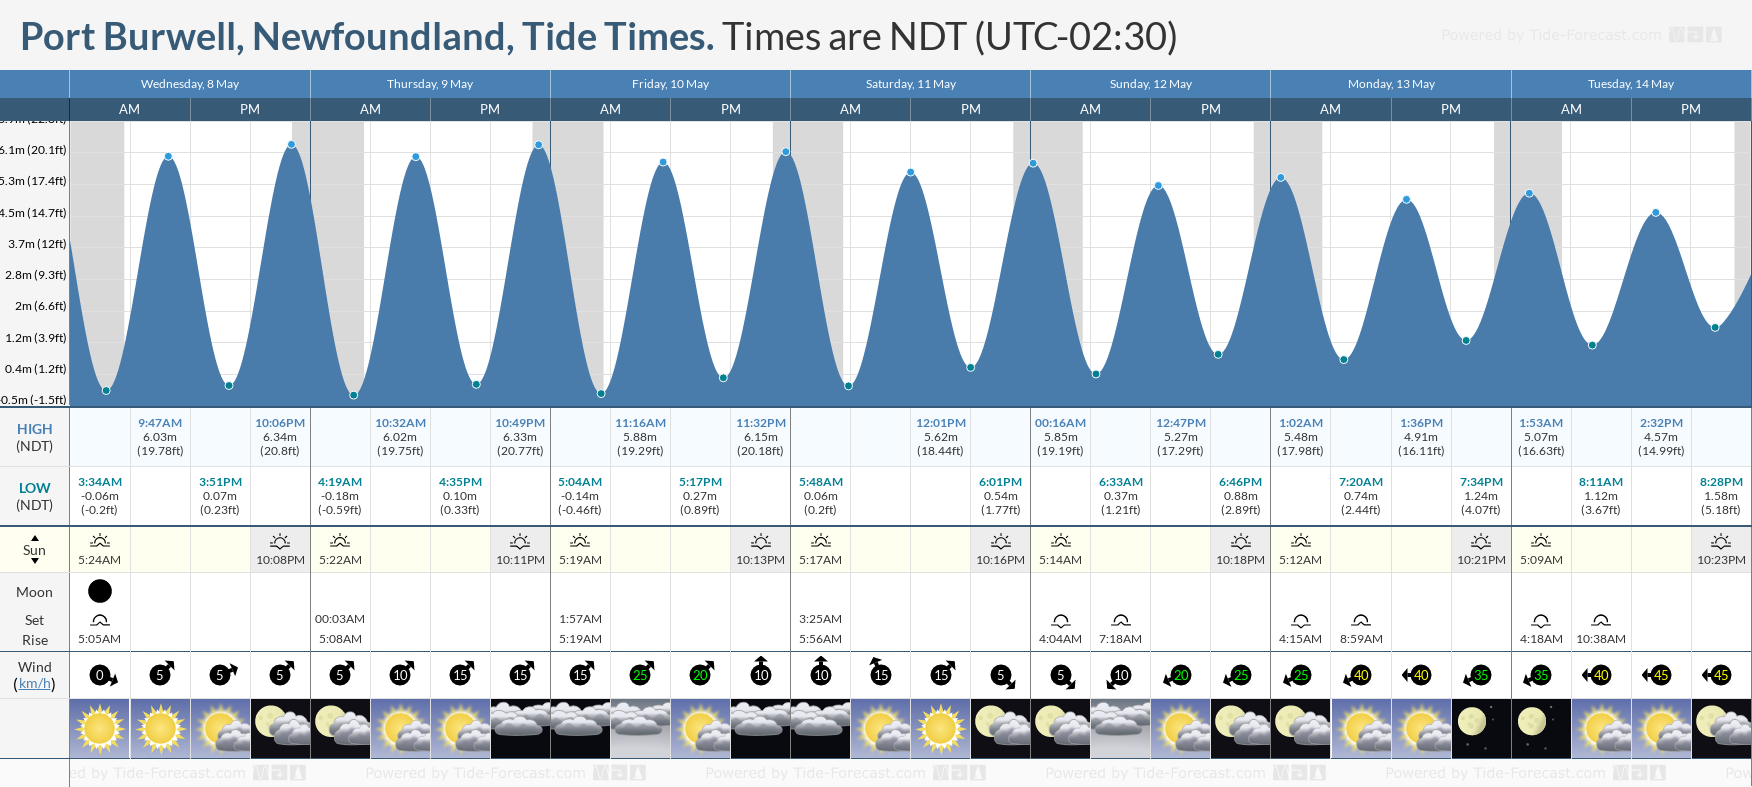 Port Burwell, Newfoundland Tide Chart including high and low tide tide times for the next 7 days